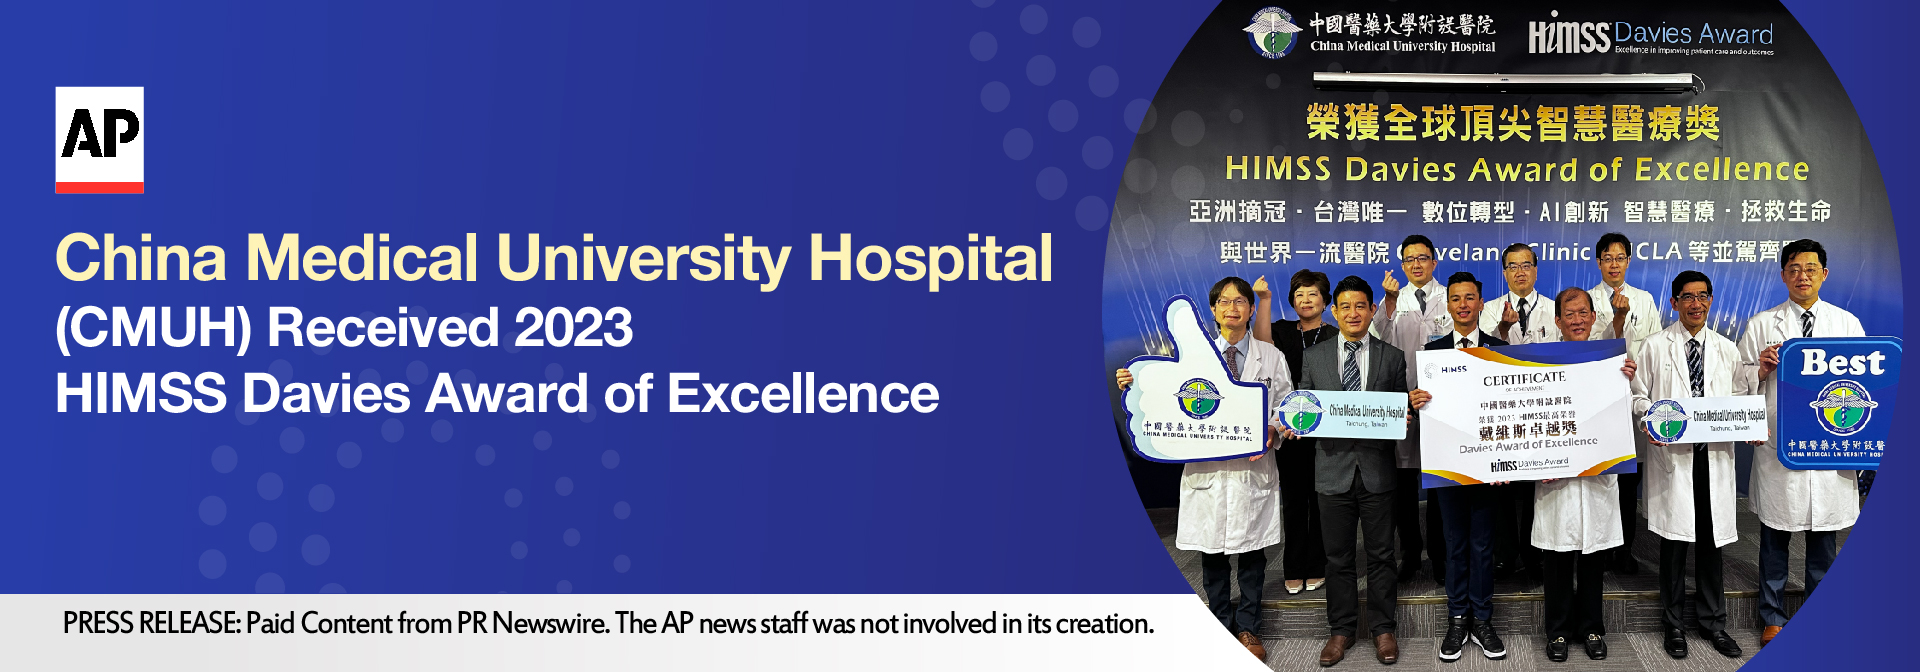 China Medical University Hospital Received 2023 HIMSS Davies Award of Excellence